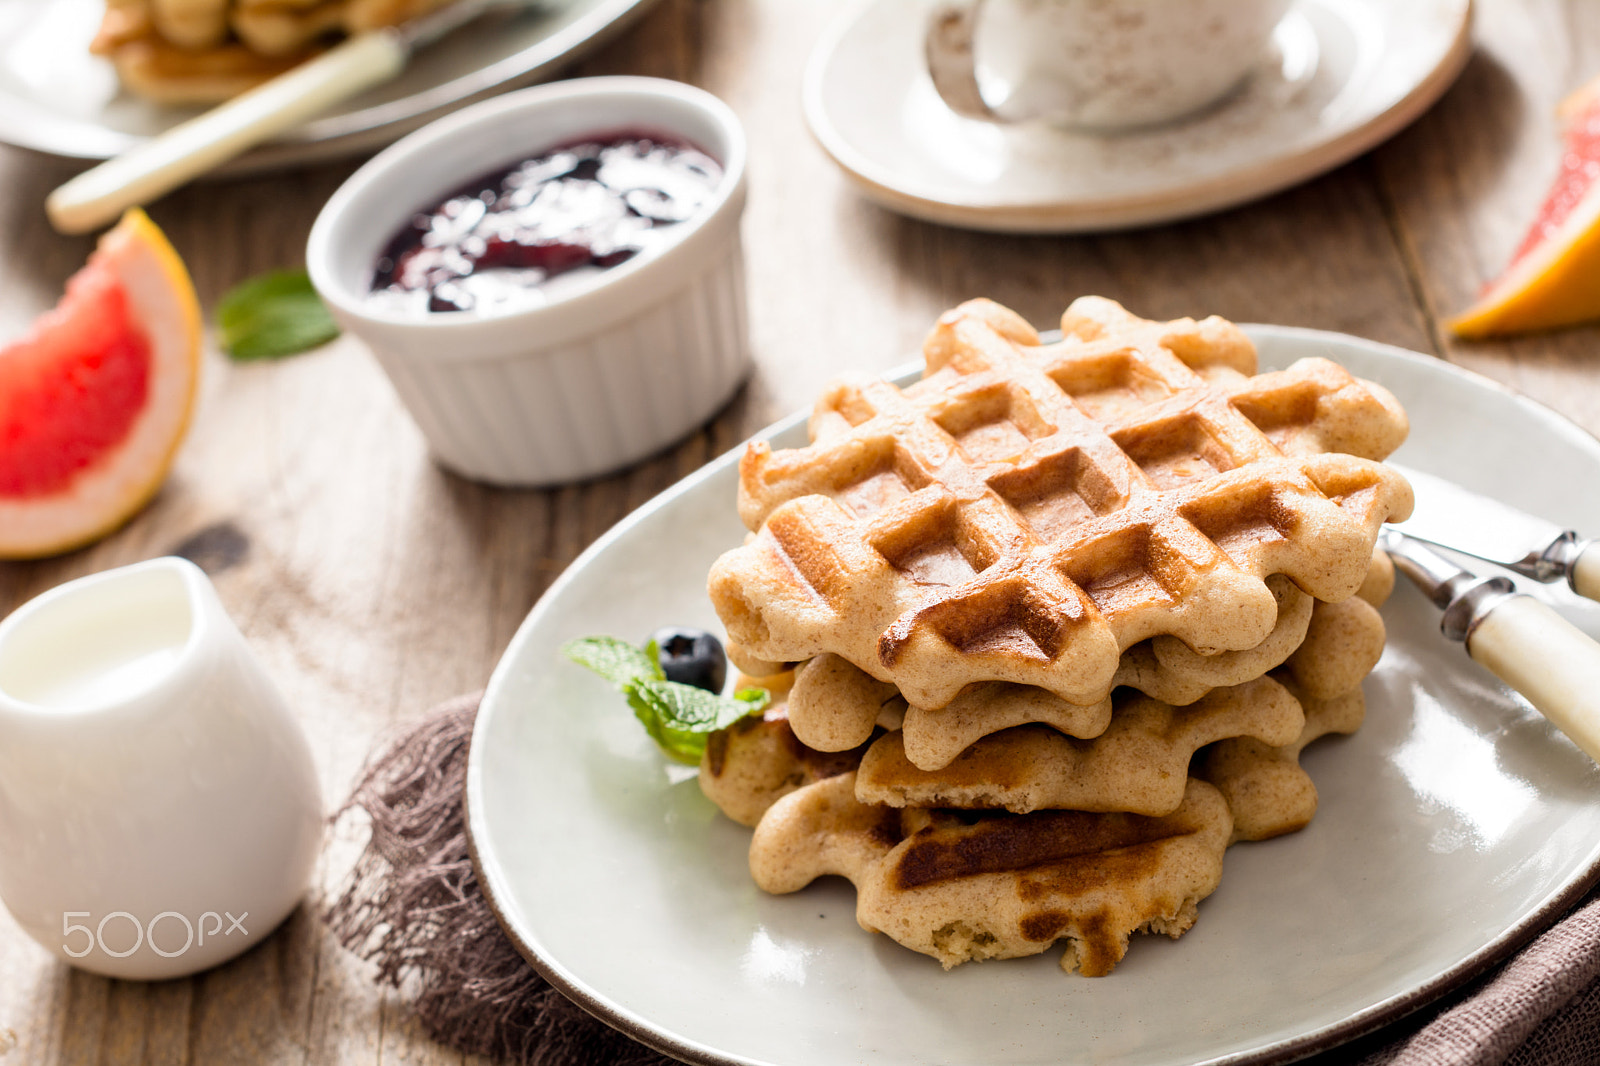 Nikon D7100 sample photo. Breakfast with waffles, jam and coffee photography